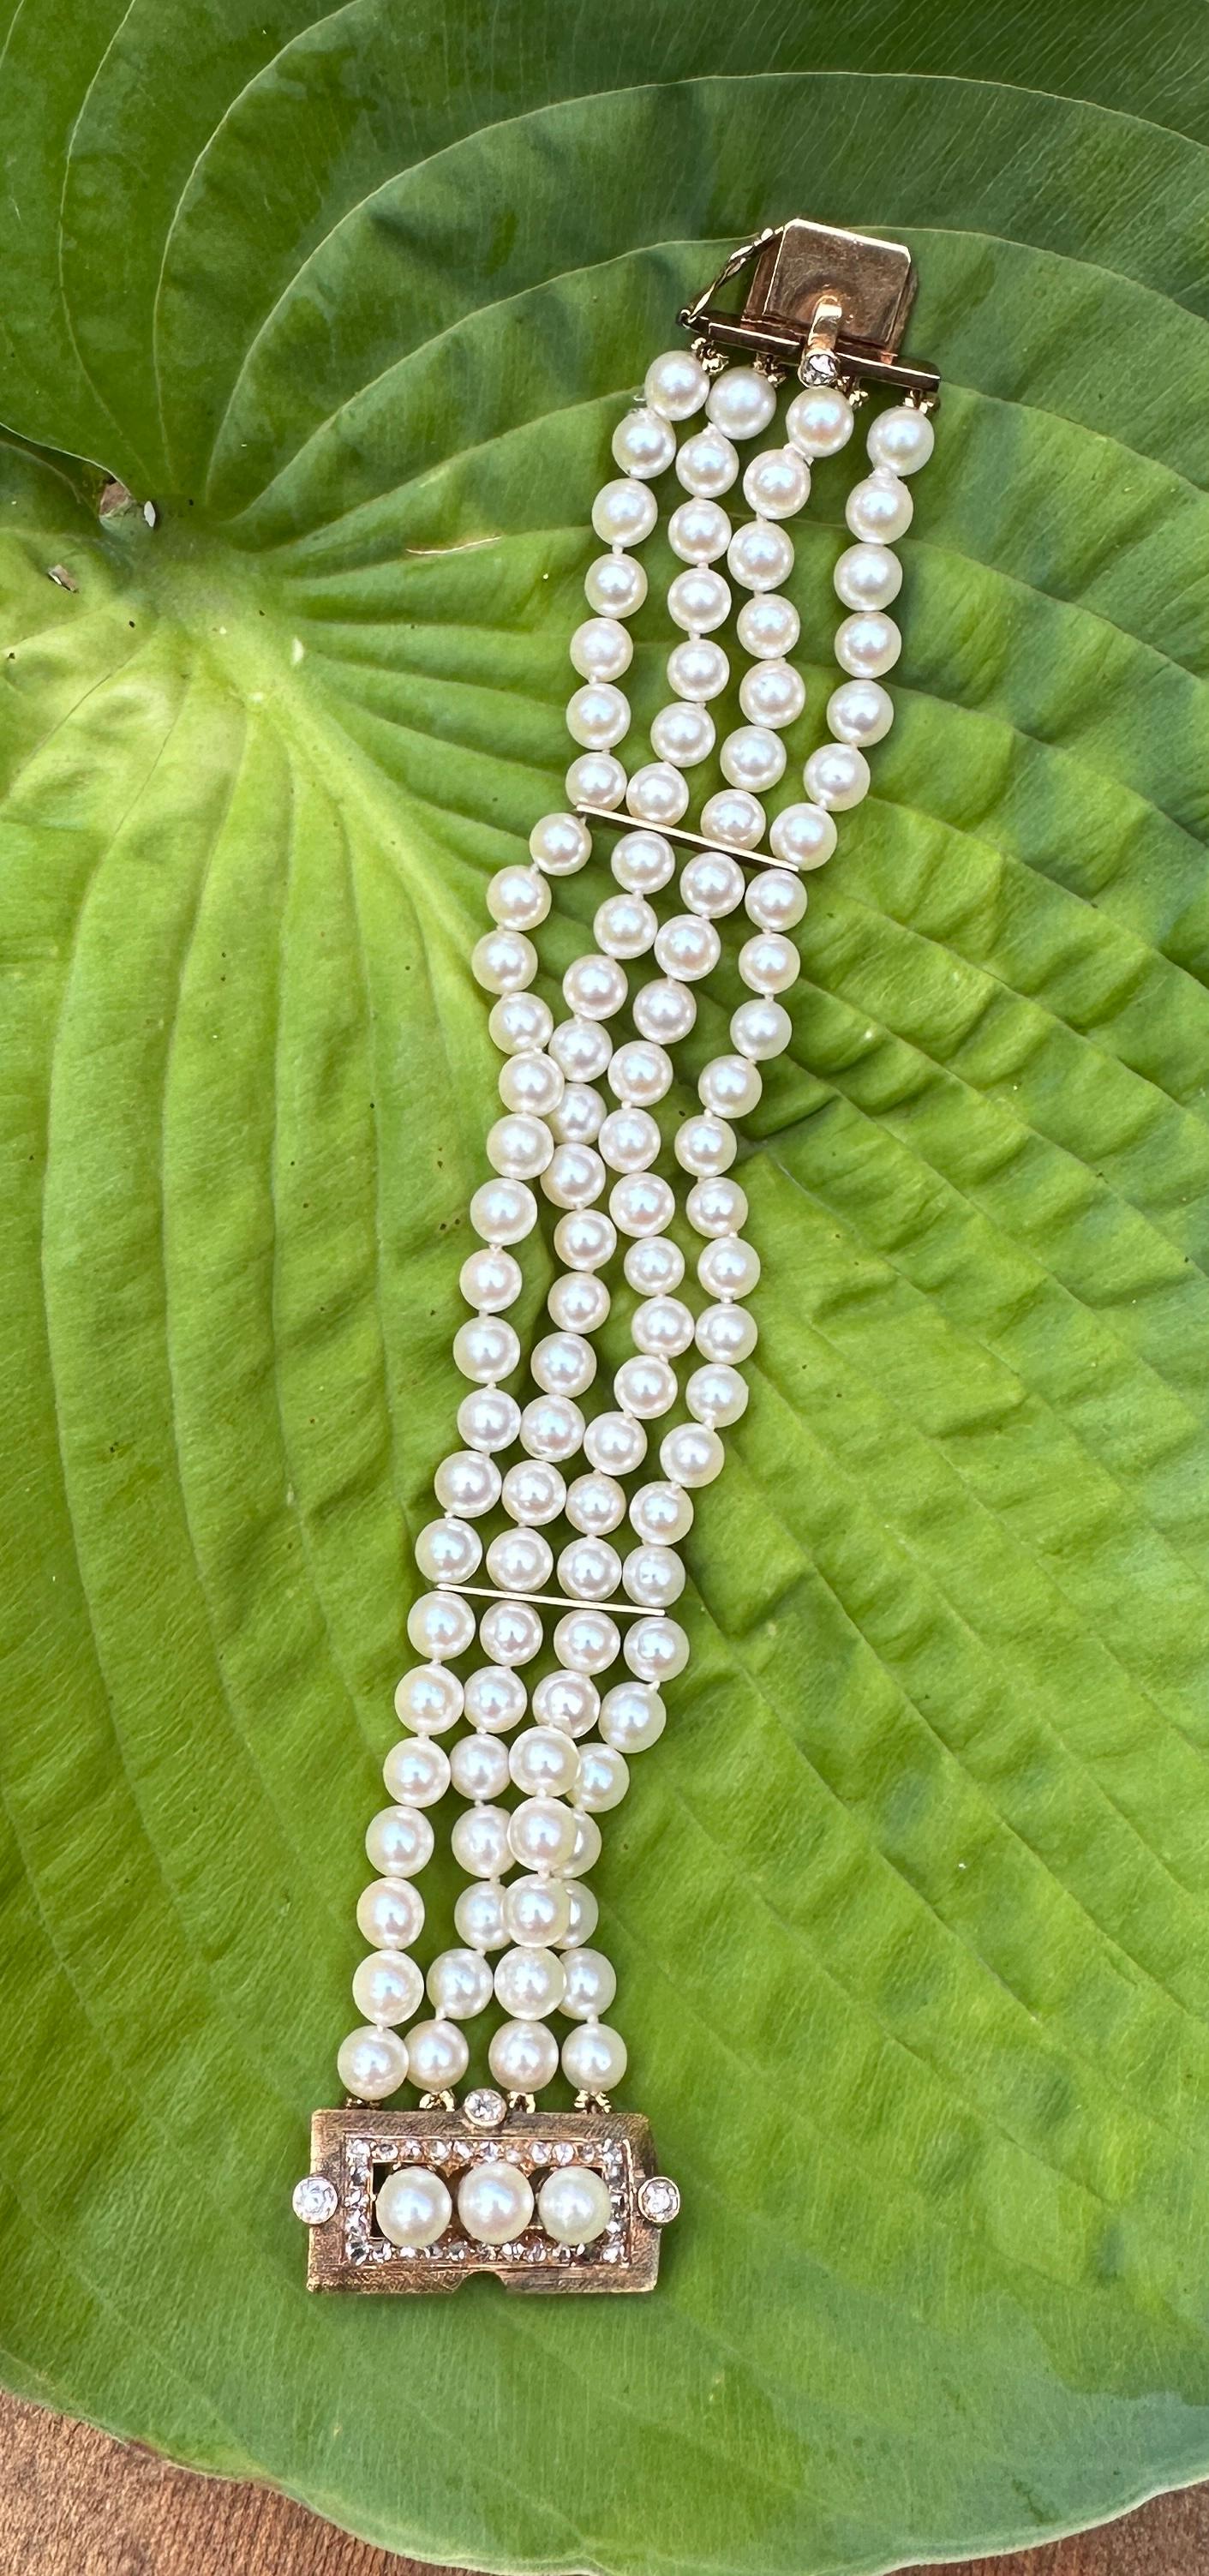 This is a spectacular antique Victorian - Art Deco Diamond and Pearl Multi-strand Bracelet of Museum Quality.  The Bracelet is set with four gorgeous Old Mine Cut Diamonds in the clasp.  These Old Mine Cut Diamonds are fabulous chunky diamonds that